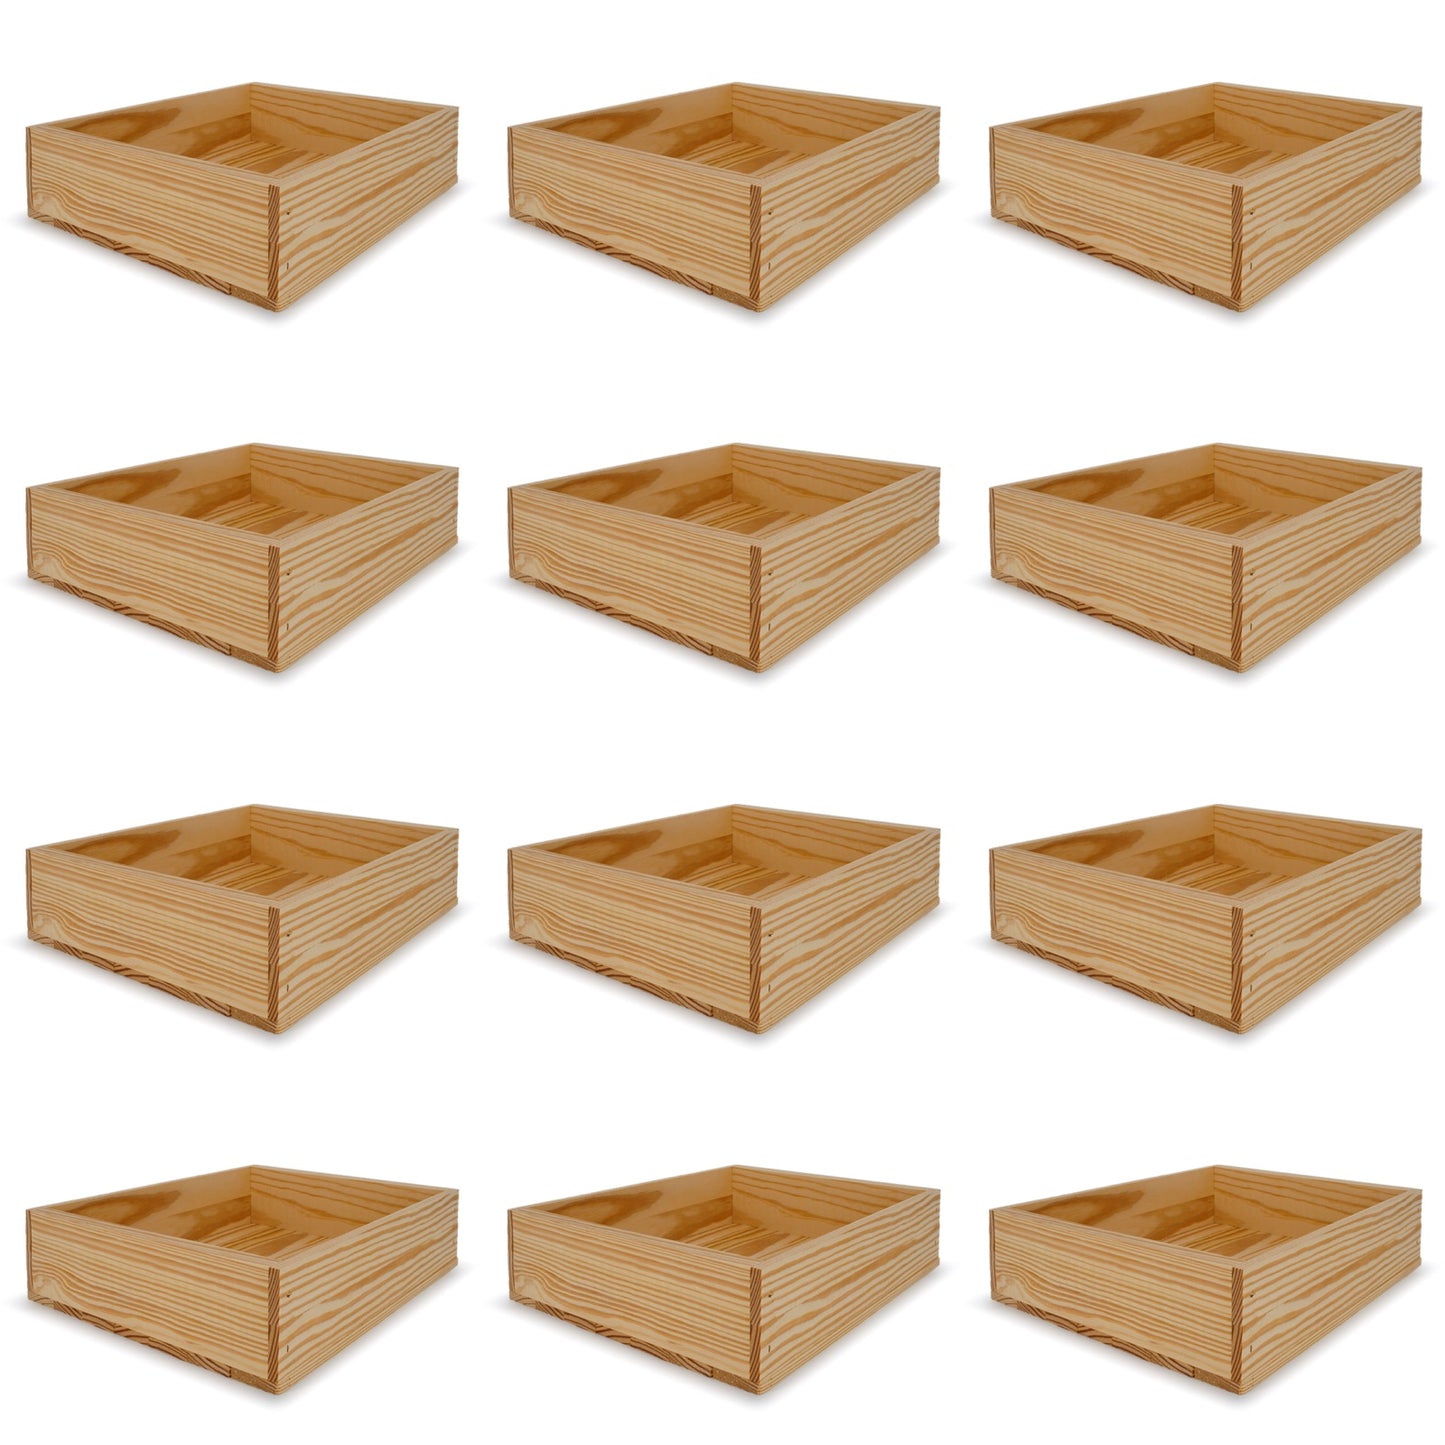 12 Small wooden crates 14x11.5x3.5